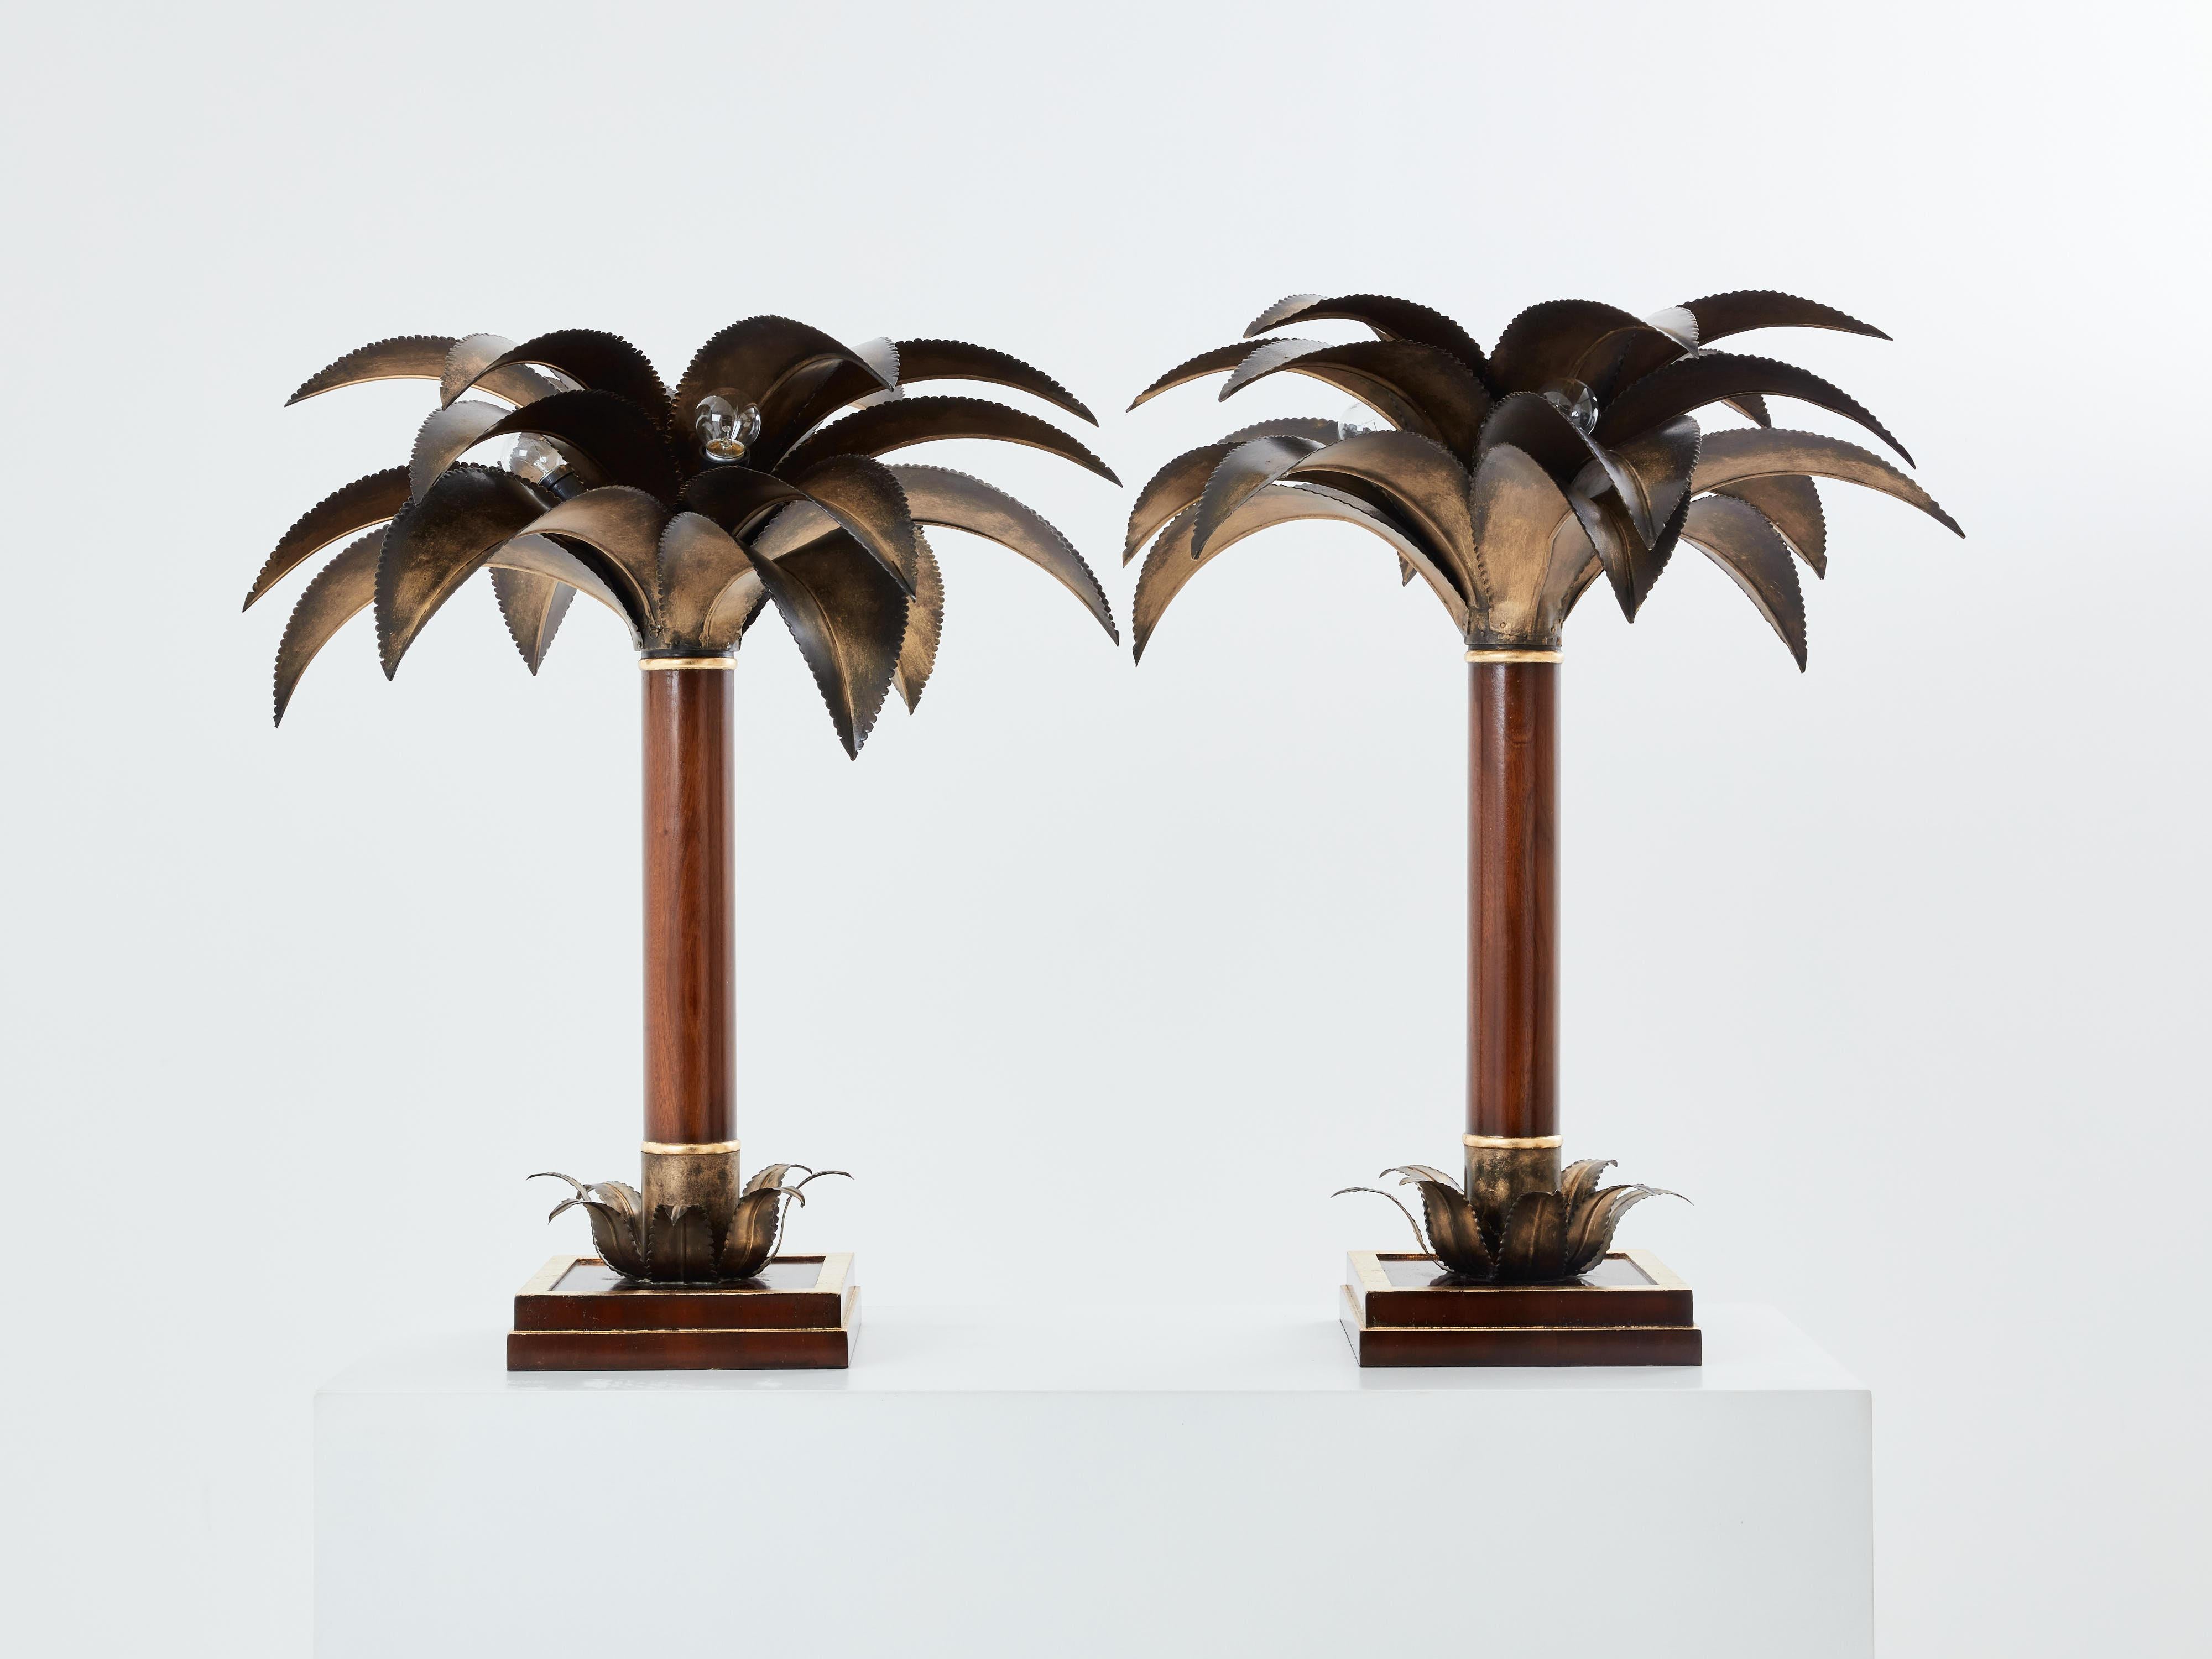 This beautiful pair of palm tree table lamps is a rare find, an early 1960s version of one of the most iconic pieces by Maison Jansen. The base and trunk are made of French mahogany wood, with gold leaf gilt accents. But what makes these Jansen palm